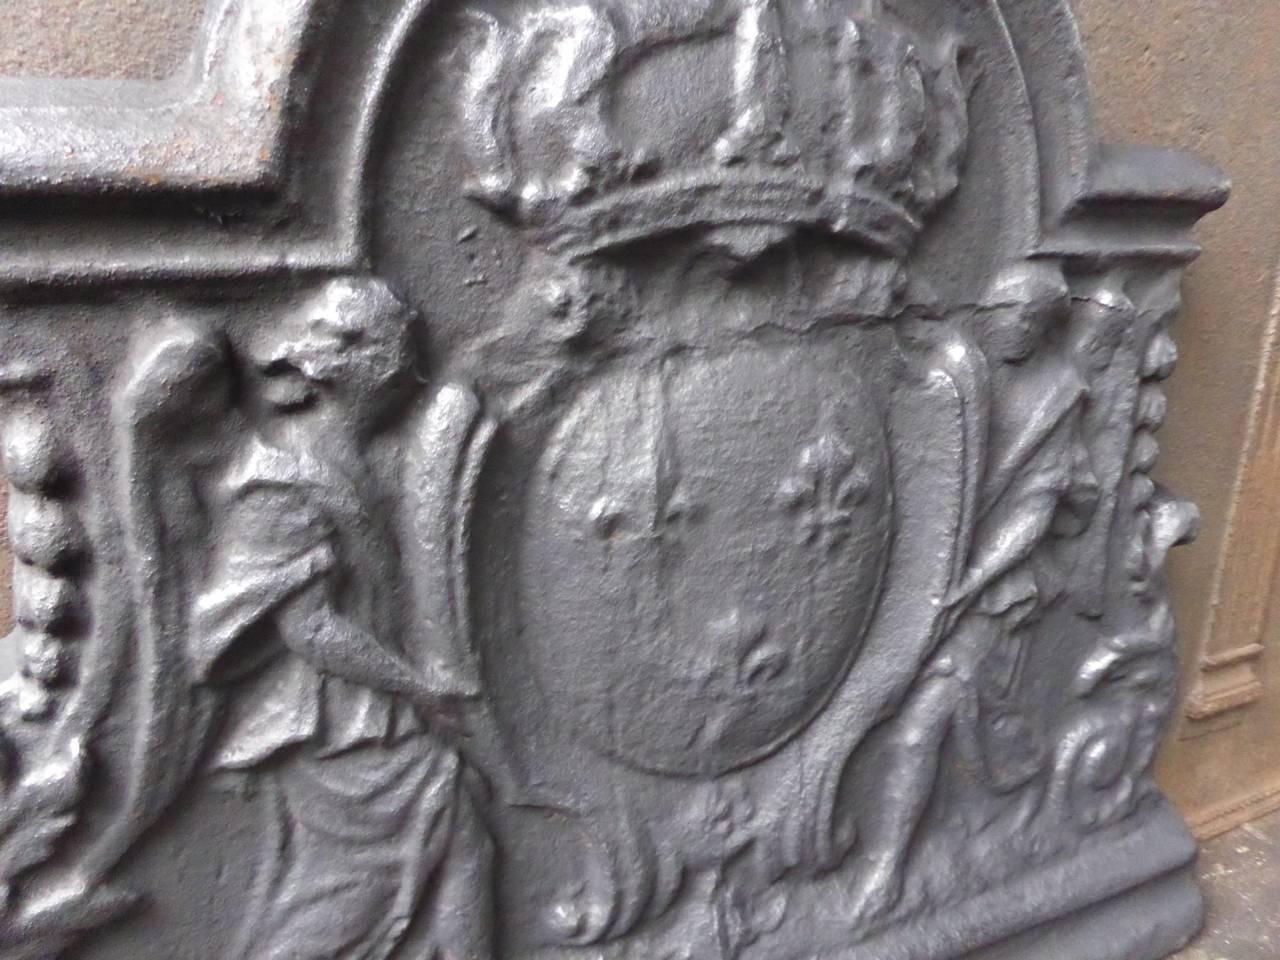 French fireback with the Arms of France. 

Coat of arms of the House of Bourbon, an originally French royal house that became a major dynasty in Europe. It delivered kings for Spain (Navarra), France, both Sicilies and Parma. Bourbon kings ruled